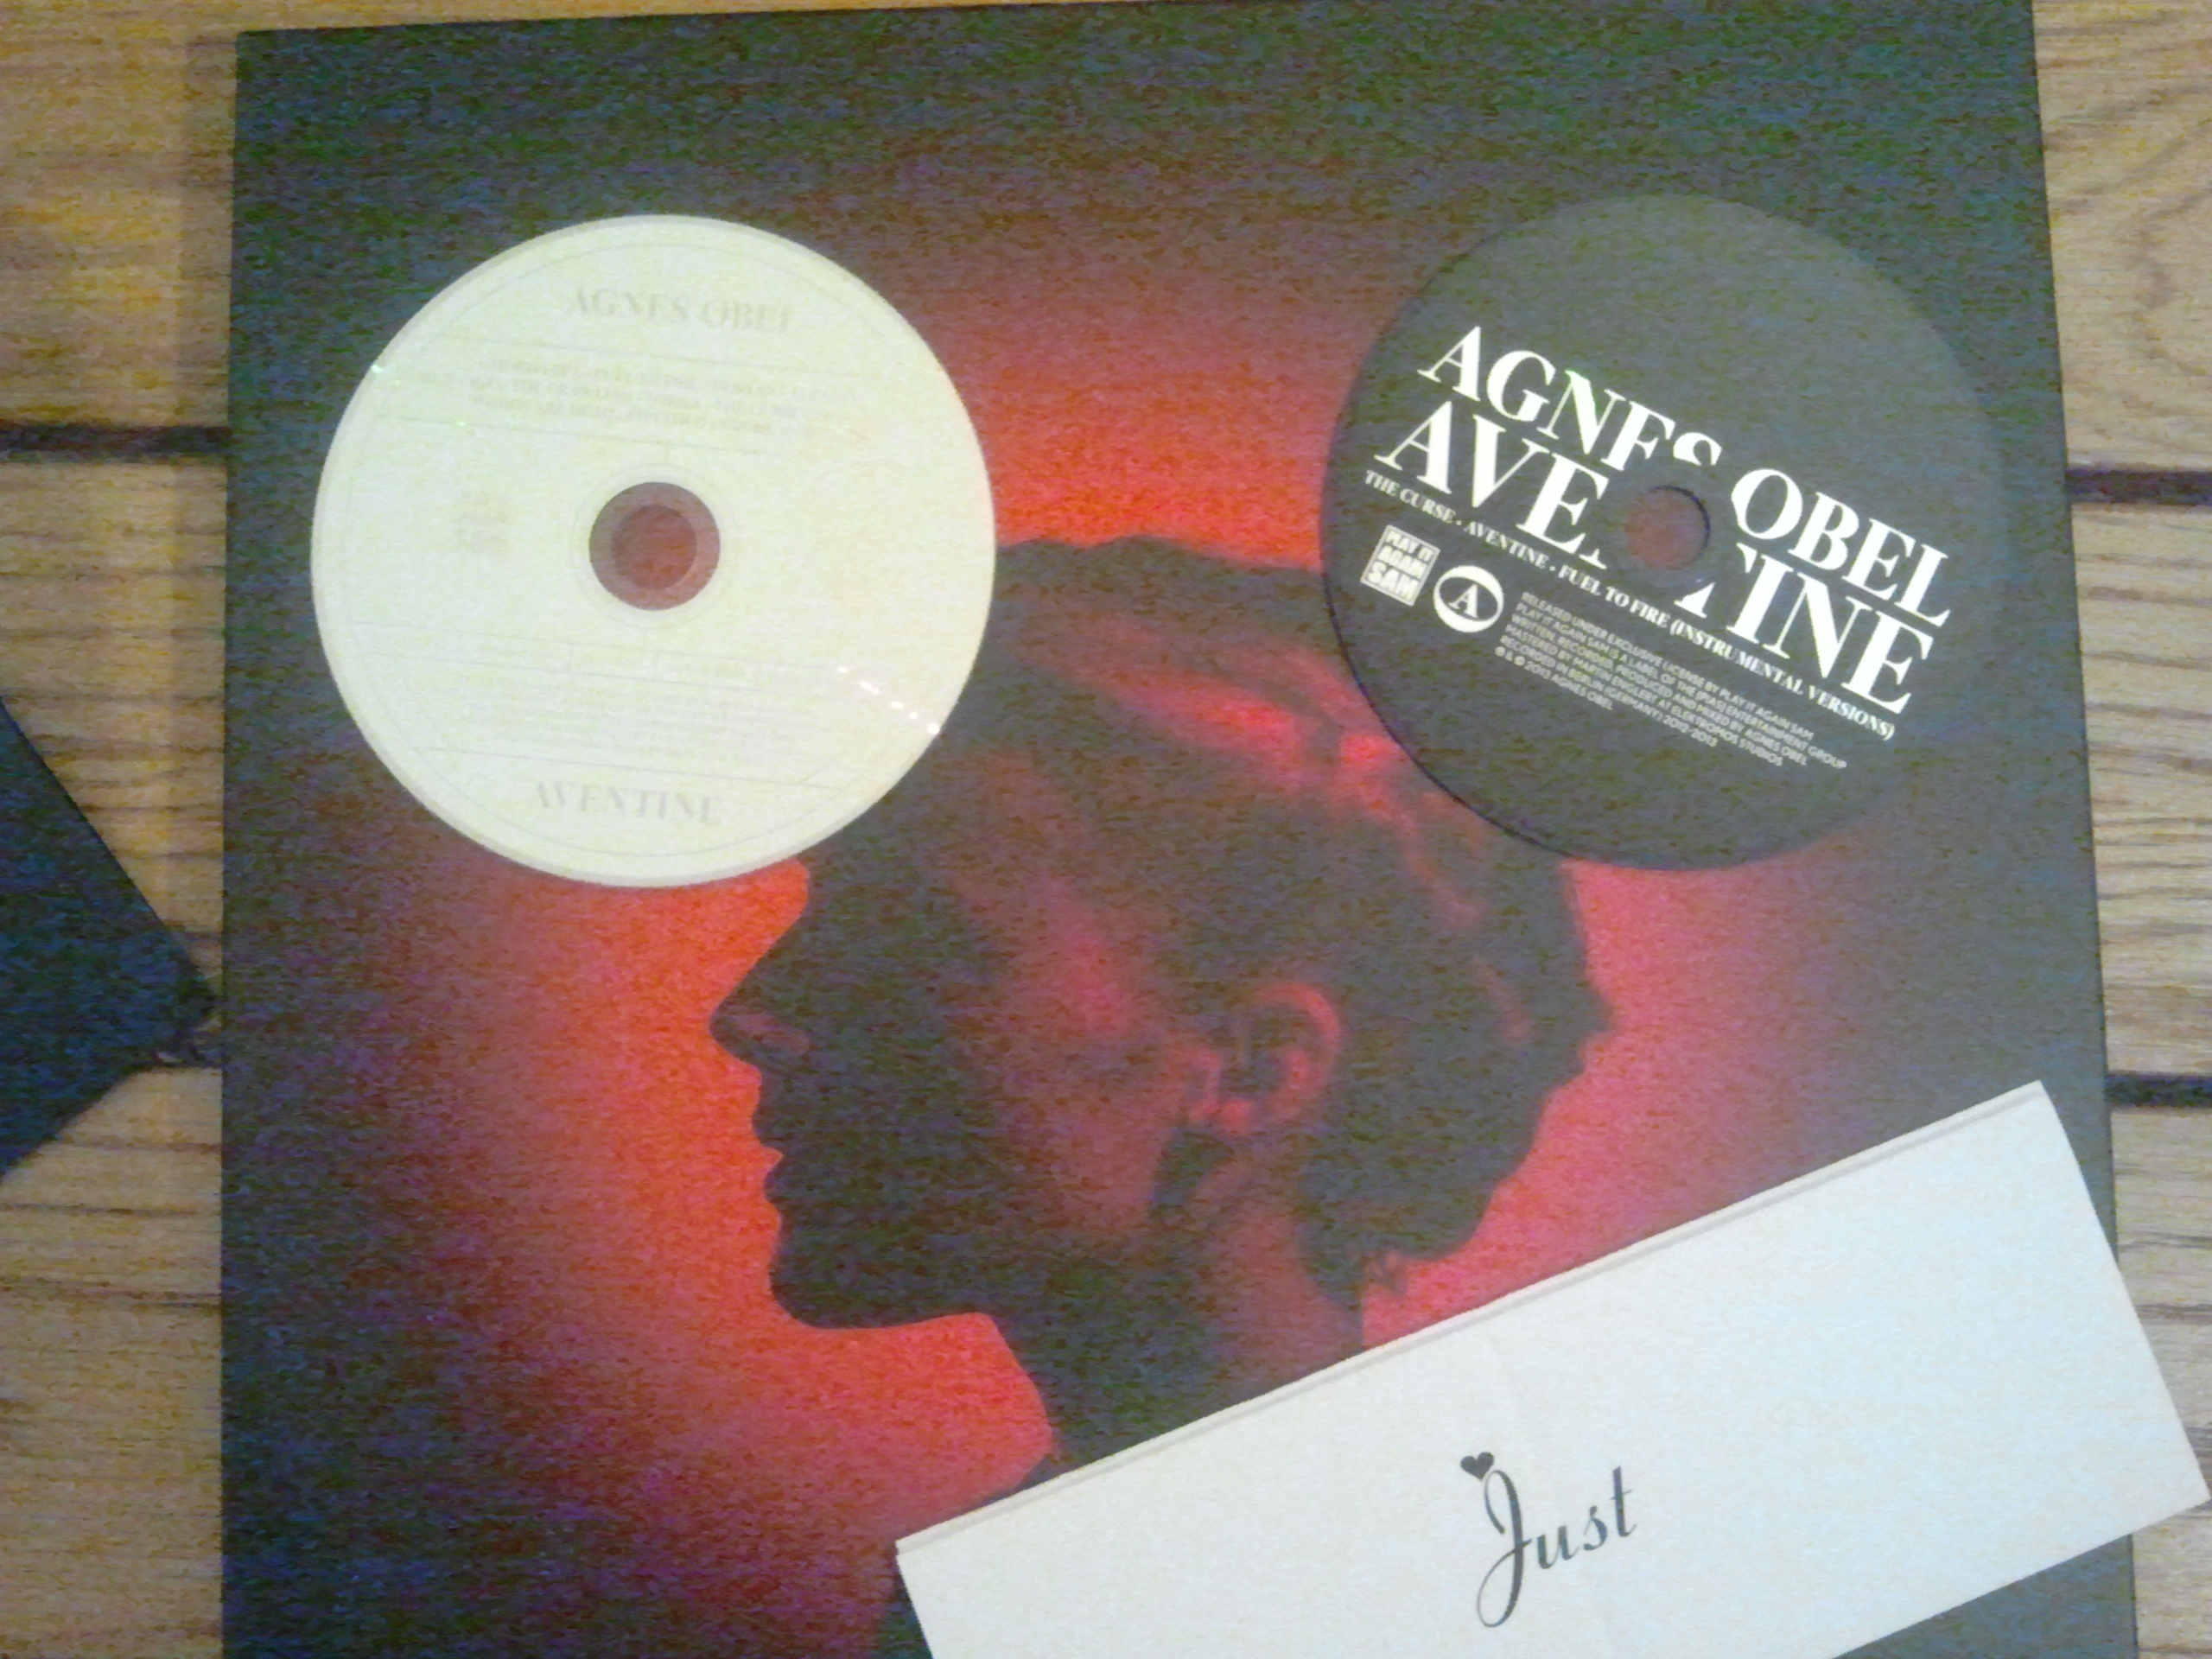 Agnes Obel- Aventine Limited Edition Deluxe Box Set 2013 - zzz.jpg